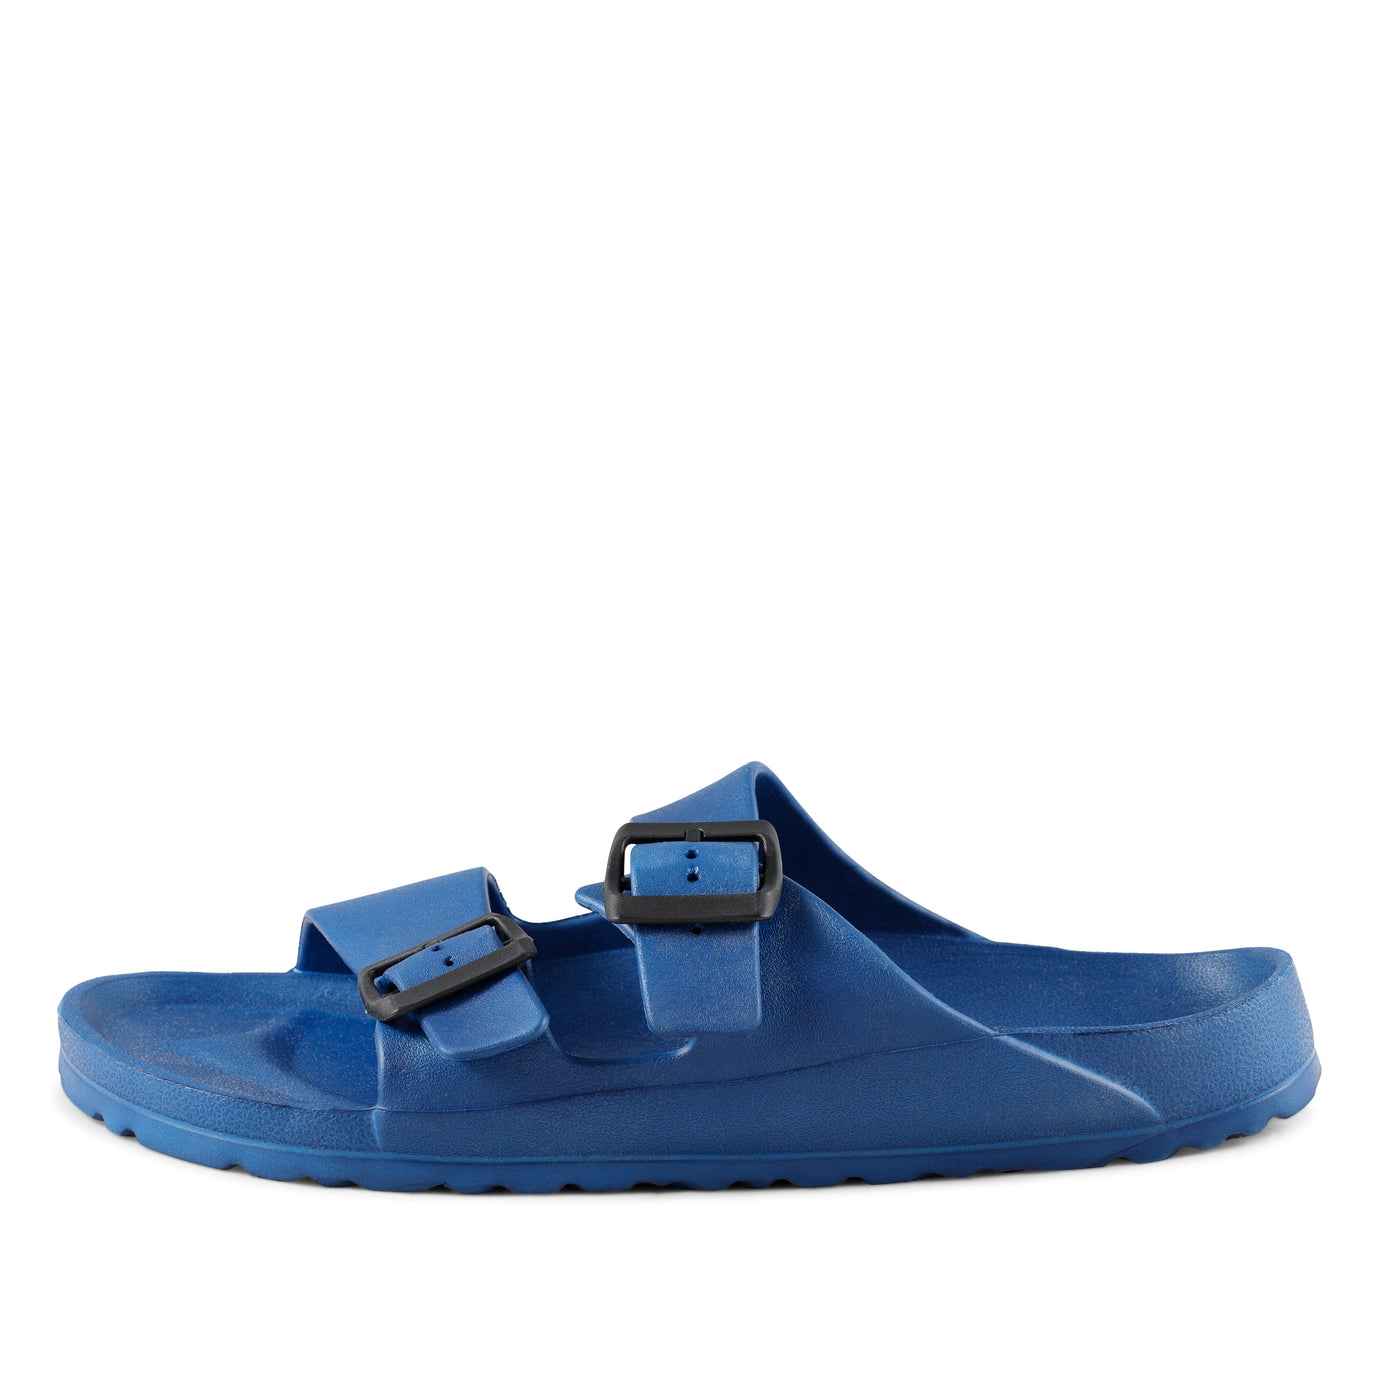 Men's Sandals Soho Navy by Nest Shoes